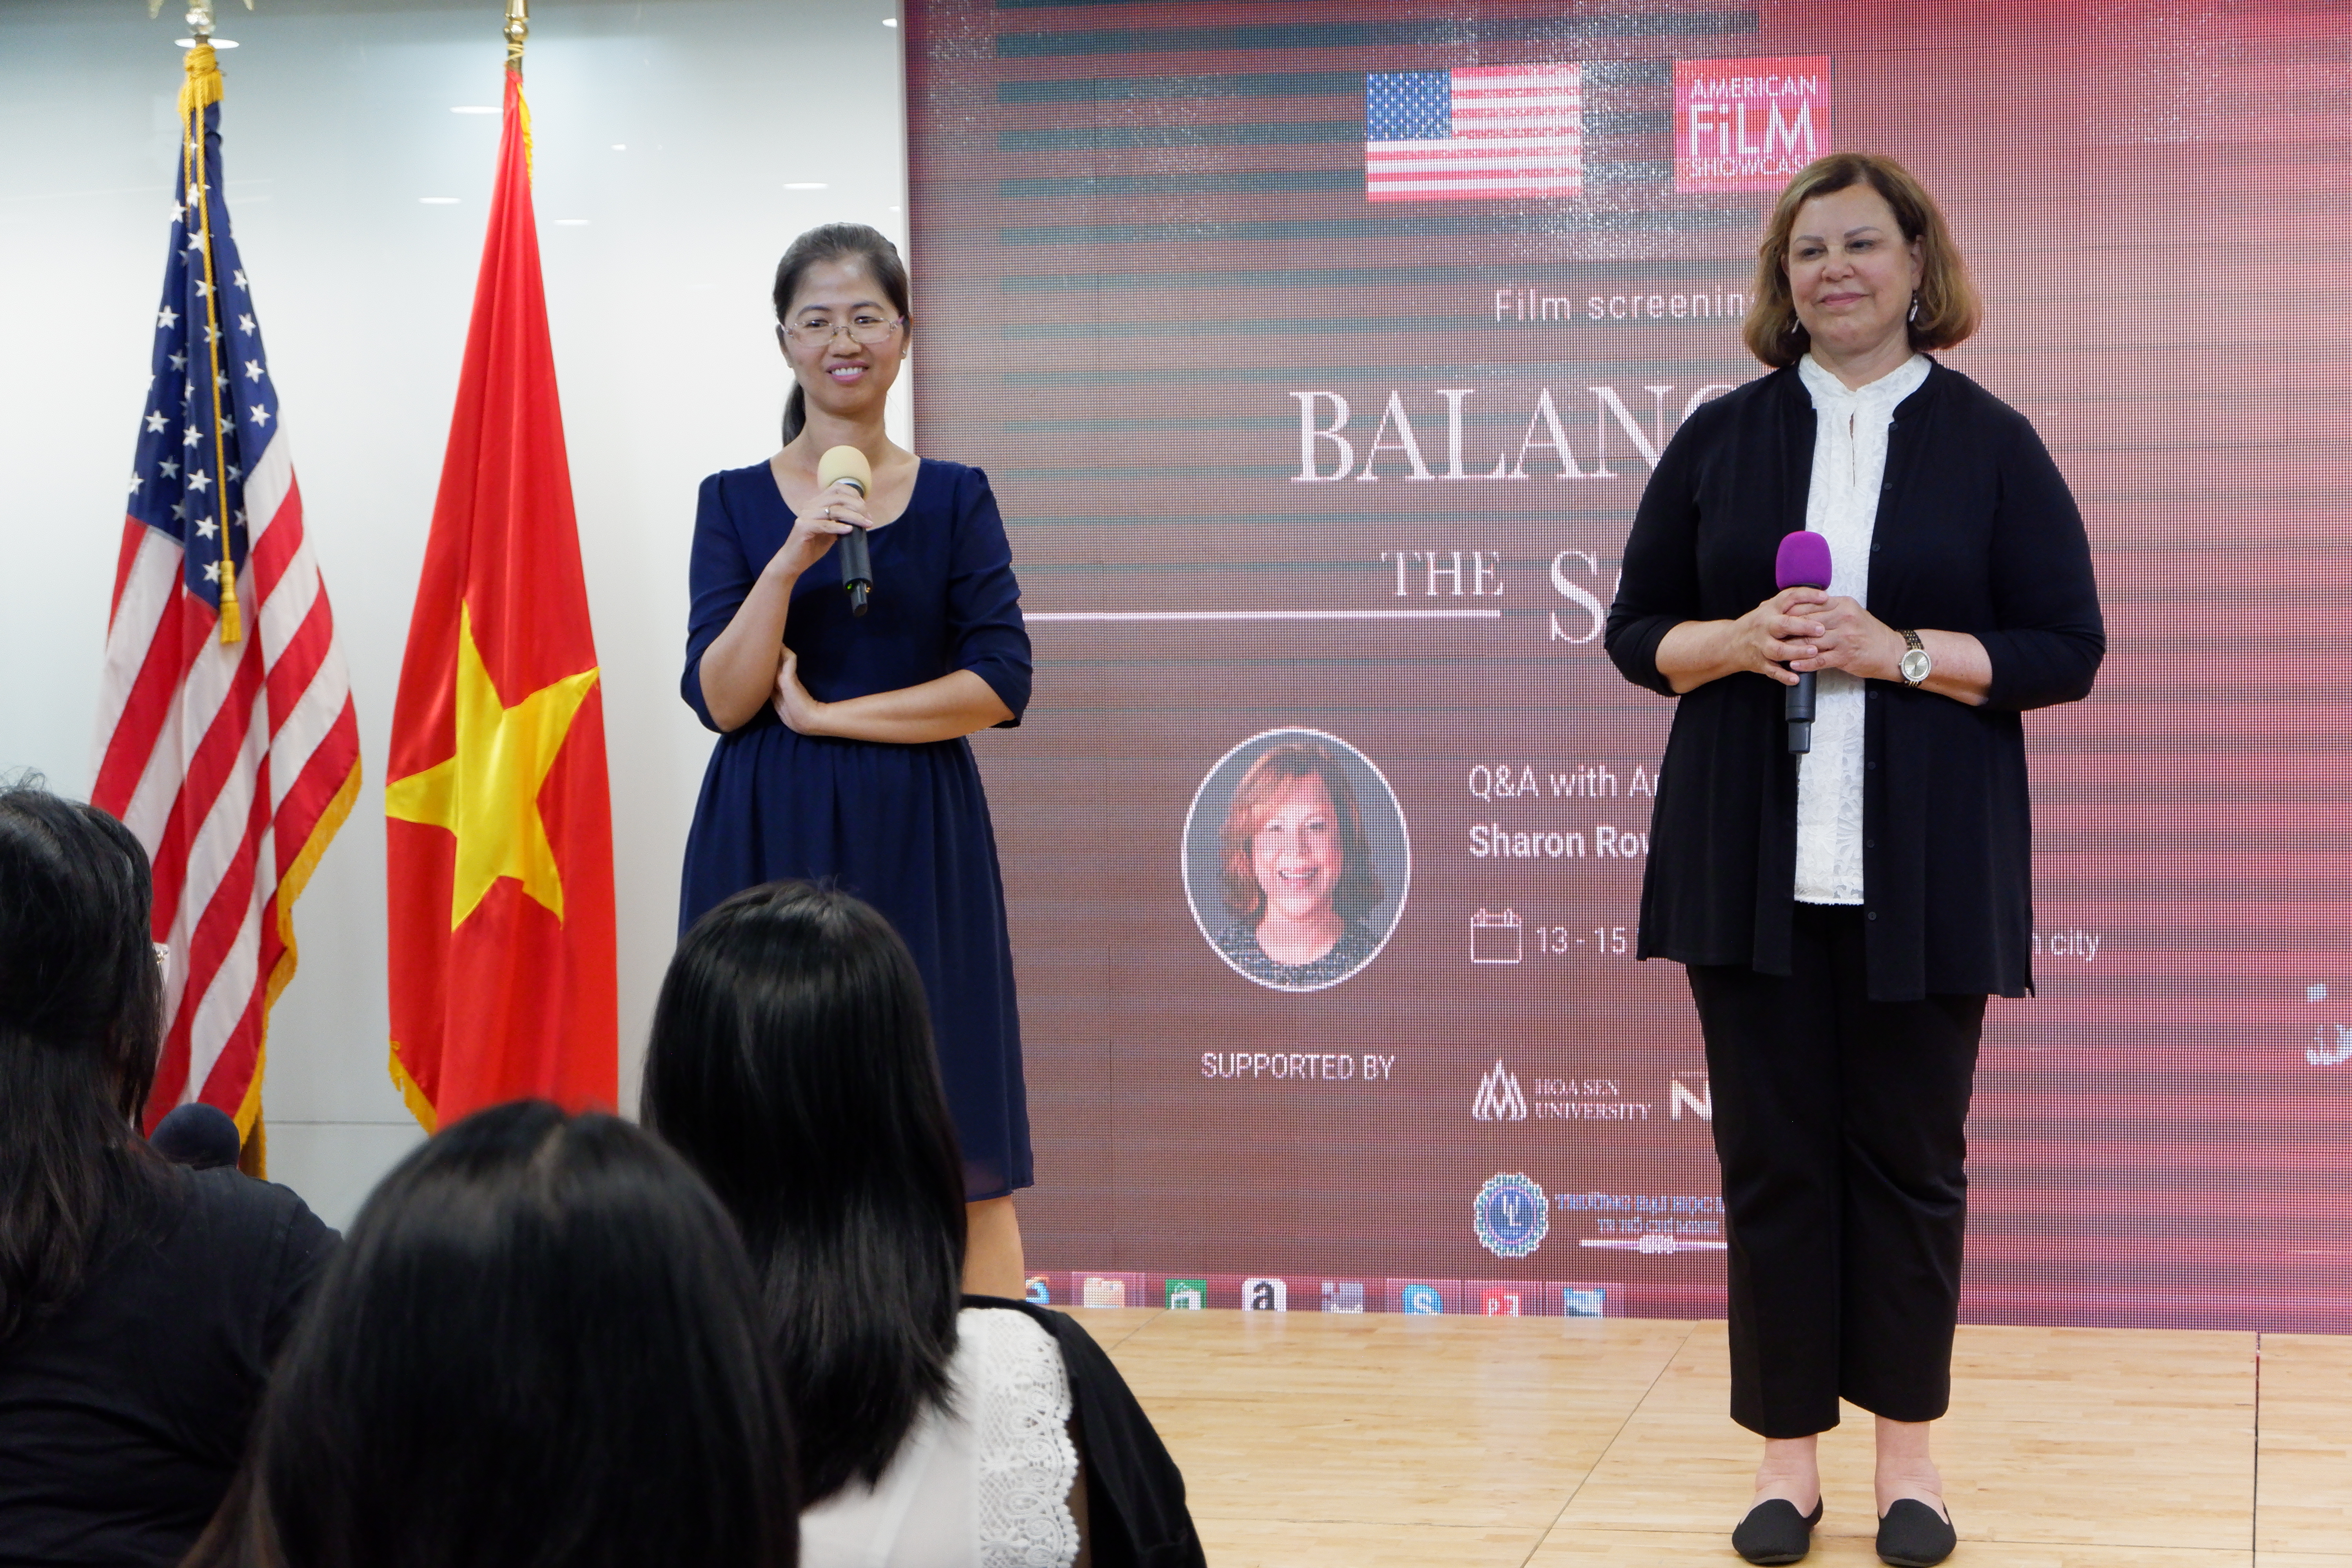 US attorney talks gender equality as her film screened in Vietnam